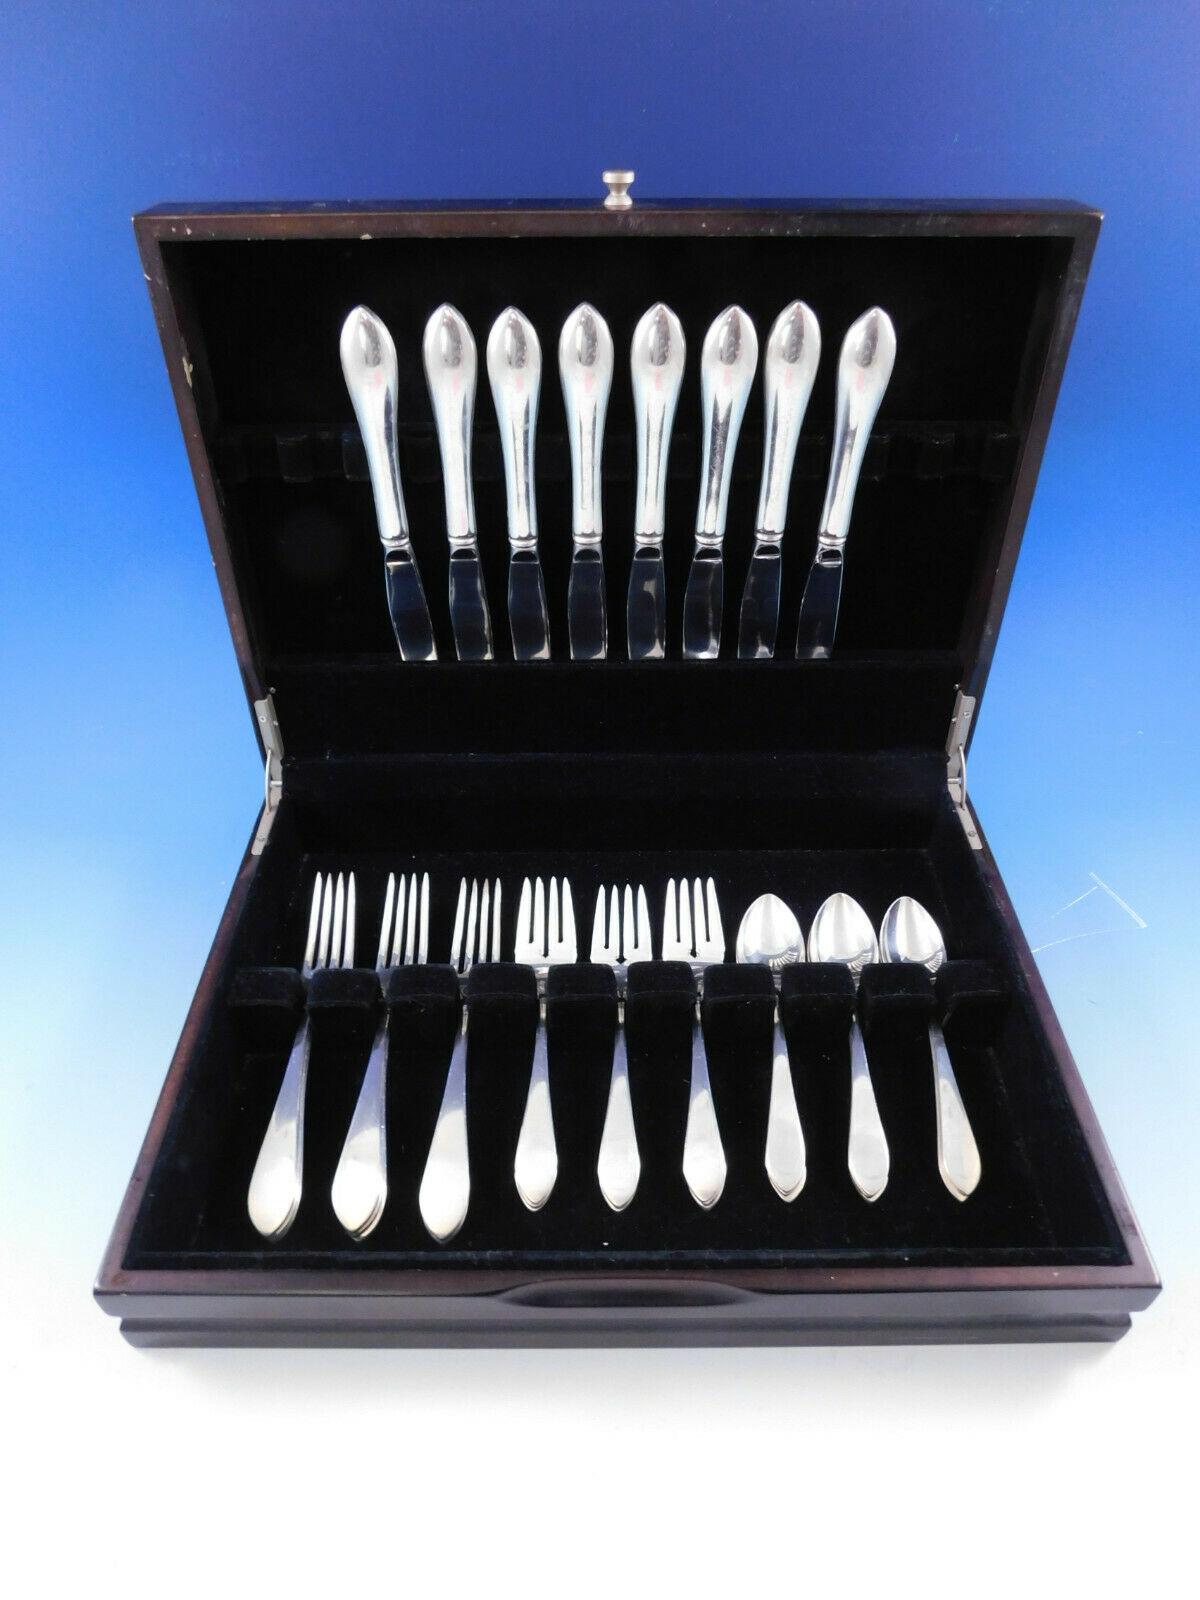 Heirloom quality pointed antique by Reed & Barton / Dominick & half sterling silver flatware set, 32 pieces. This set includes:

8 knives, 9 1/8